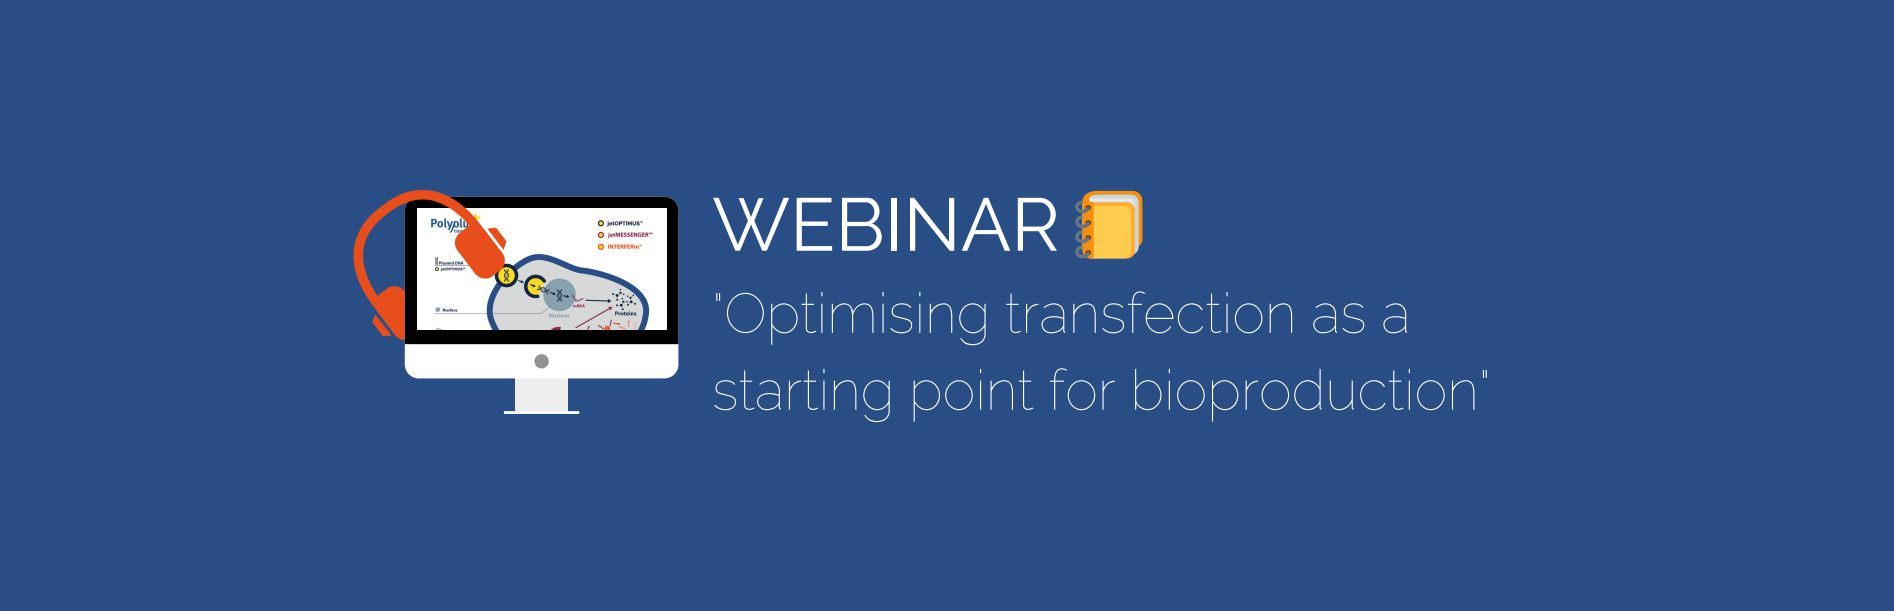 [Webinar] Optimising transfection as a starting point for bioproduction